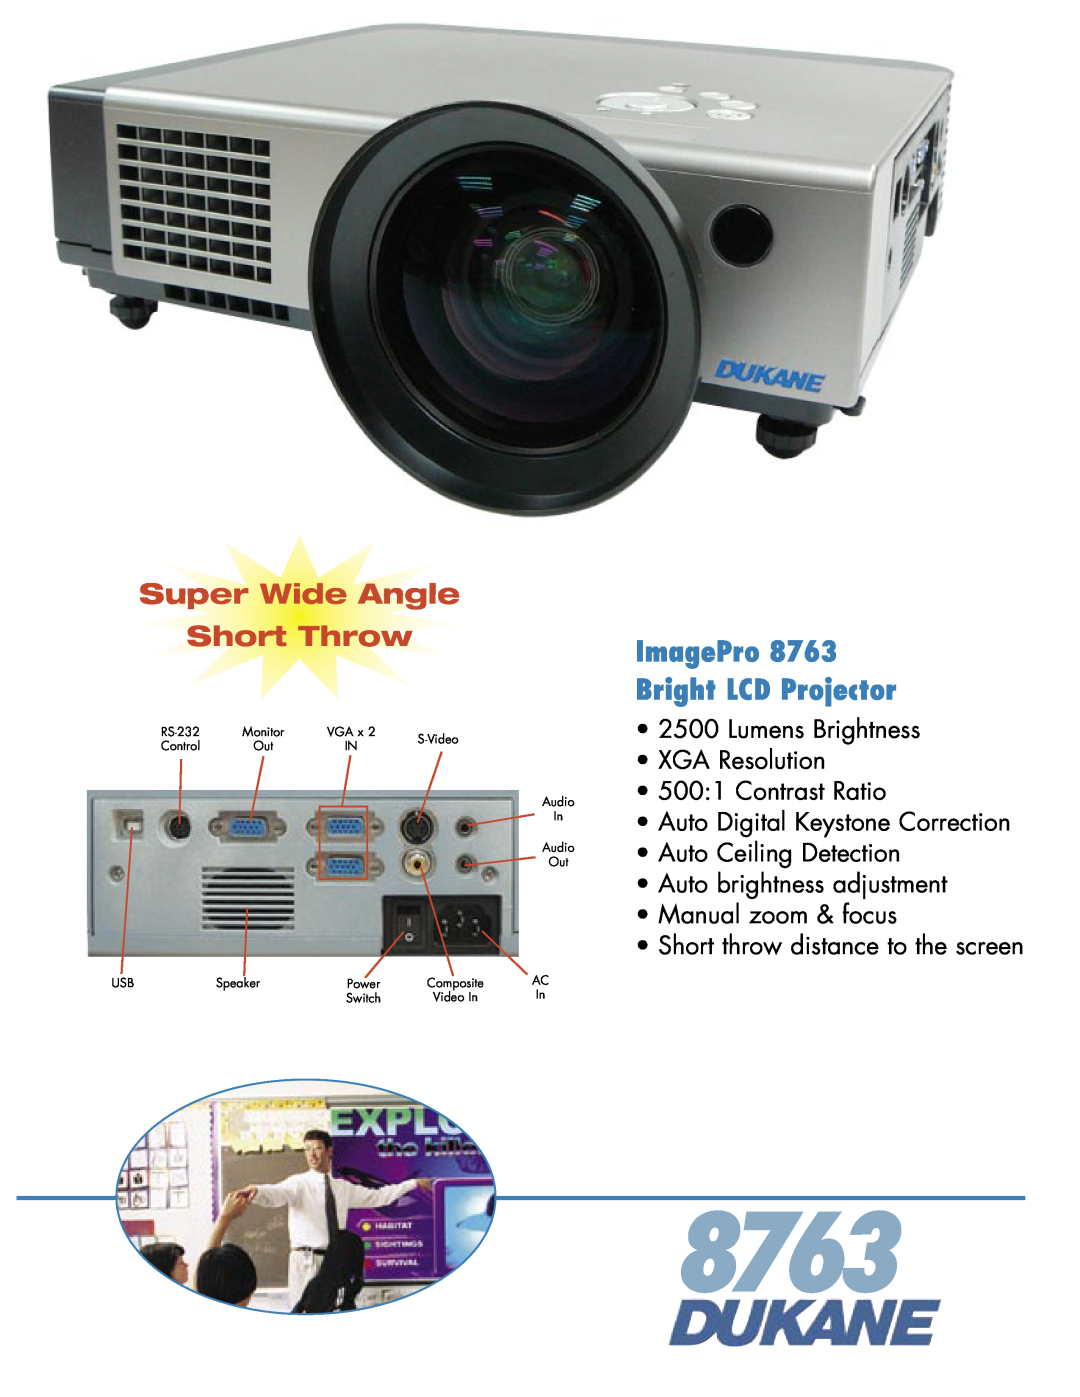 Dukane 8763 manual Super Wide Angle Short Throw, ImagePro Bright LCD Projector, Short throw distance to the screen 